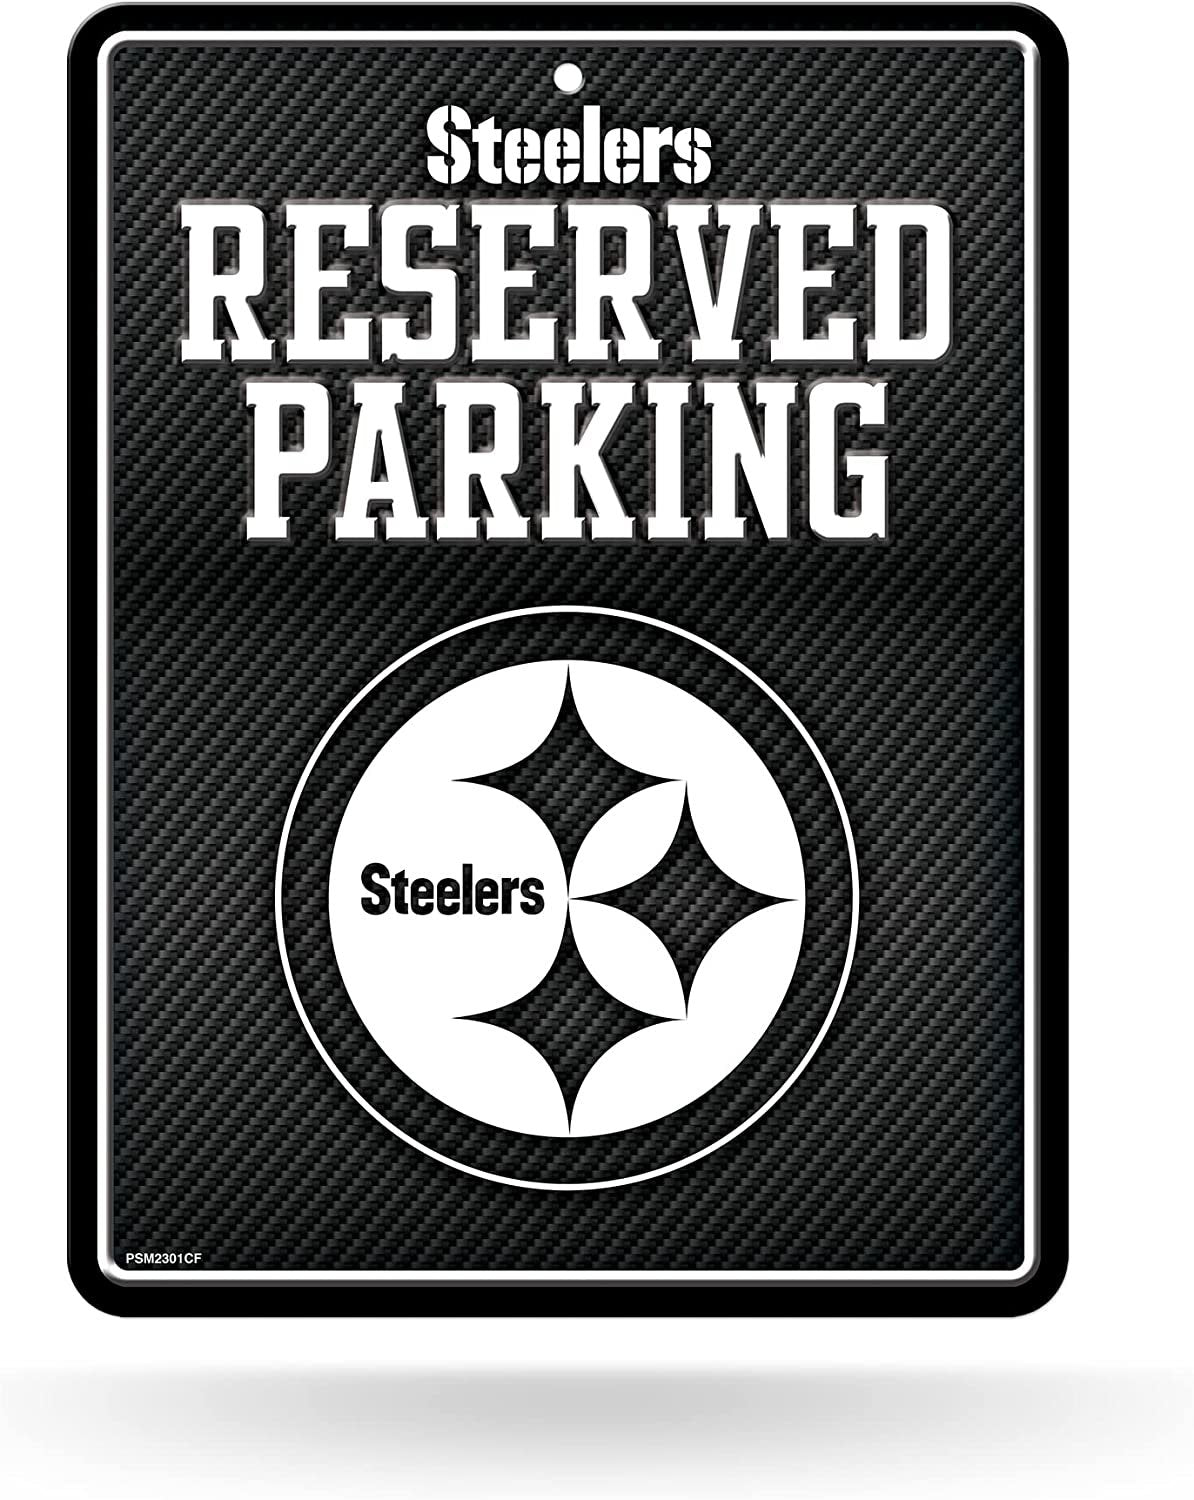 Pittsburgh Steelers Metal Parking Novelty Wall Sign 8.5 x 11 Inch Carbon Fiber Design